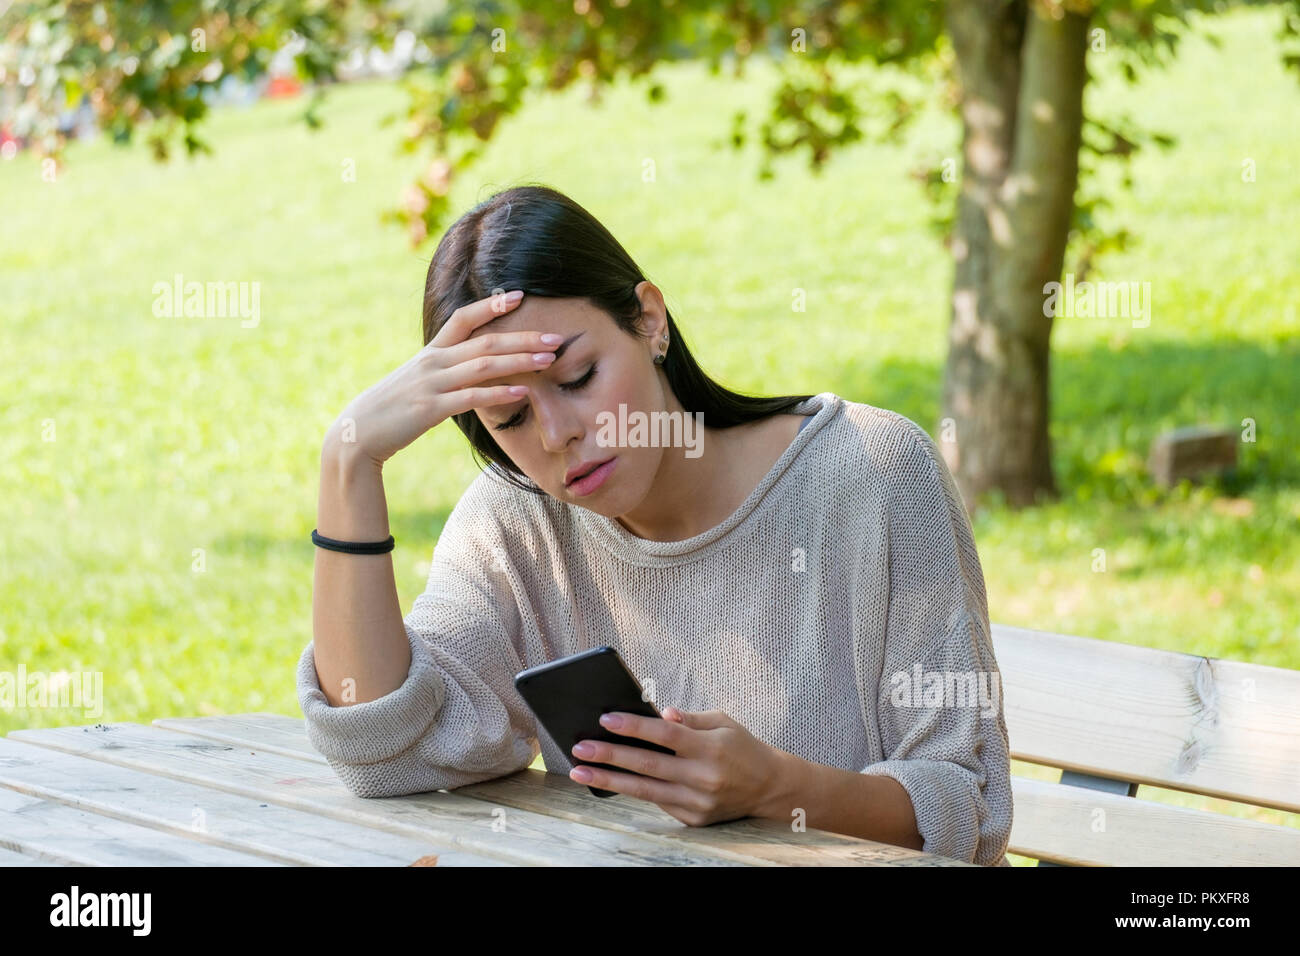 Sad girl watching her smartphone and feeling alone waiting social notifications Stock Photo